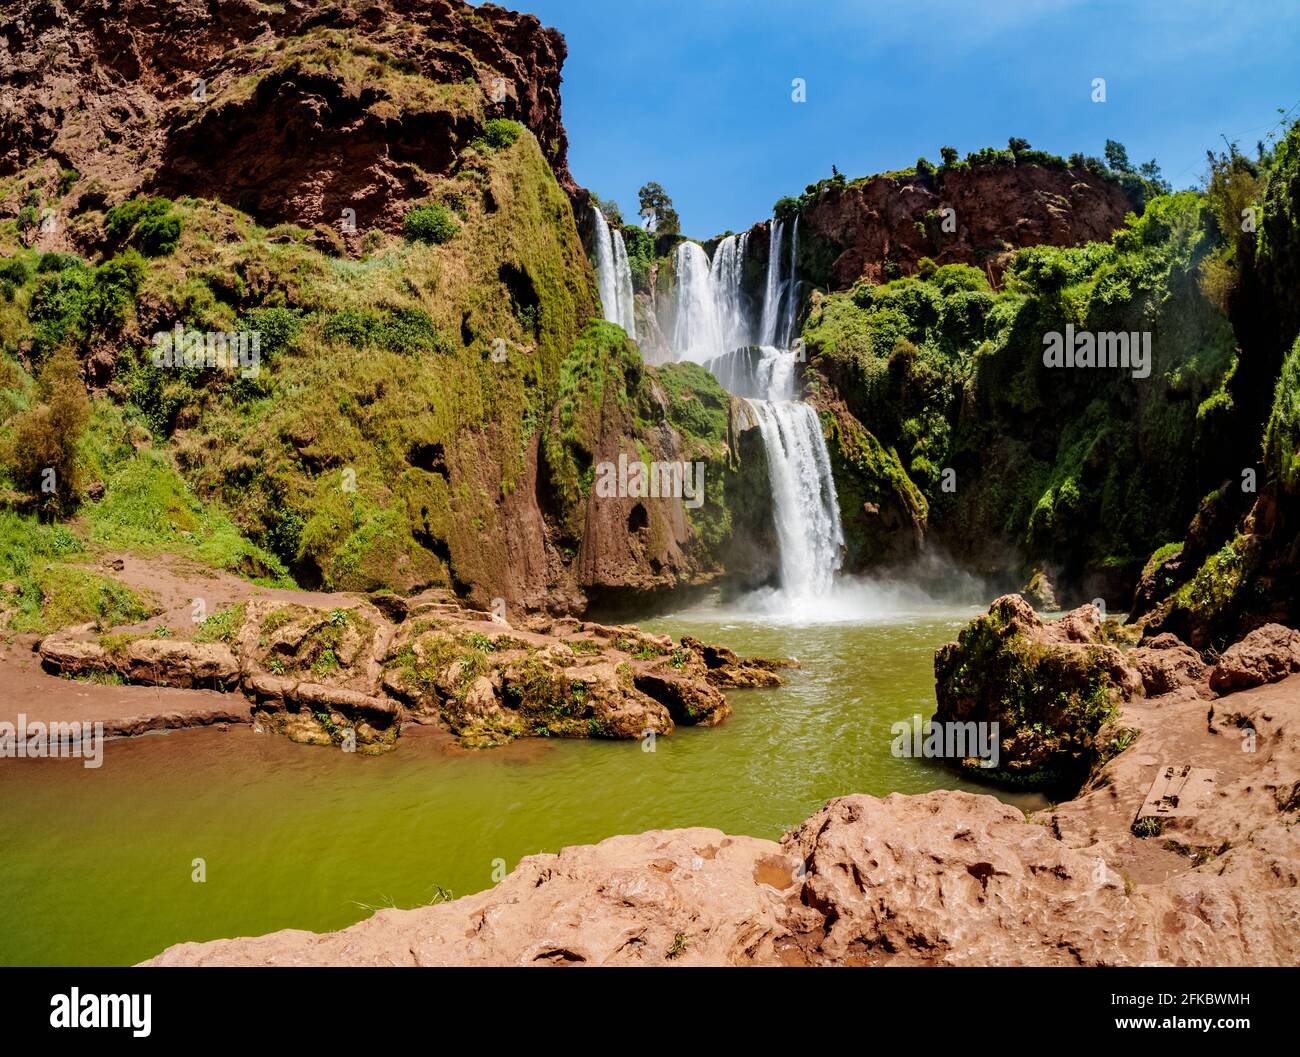 Ouzoud Falls, waterfall near the Middle Atlas village of Tanaghmeilt, Azilal Province, Beni Mellal-Khenifra Region, Morocco, North Africa, Africa Stock Photo